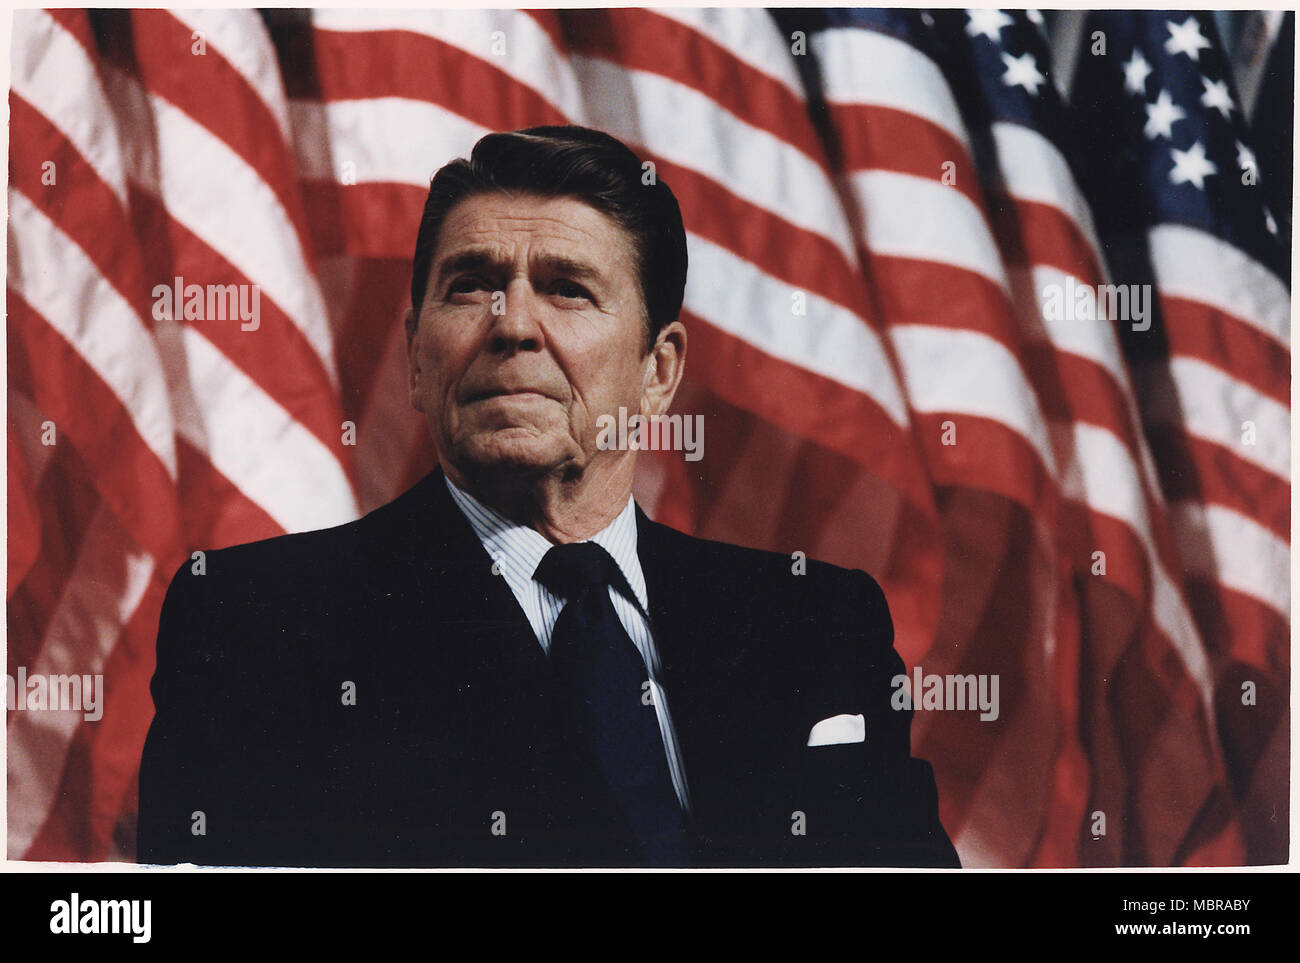 President Ronald Reagan speaks from the presidential podium before a row of American flags Stock Photo